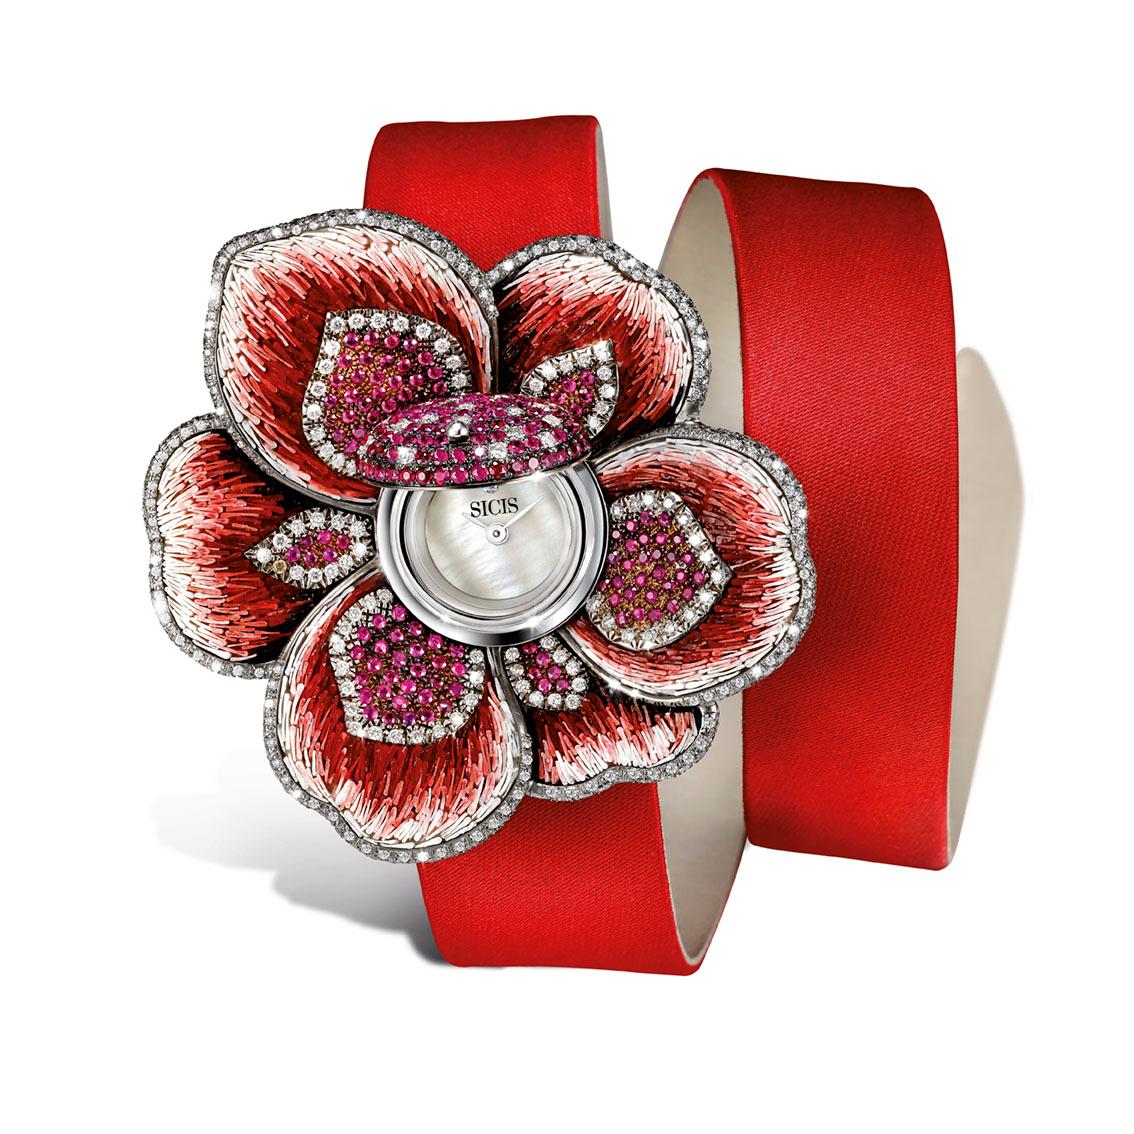 Brilliant Cut Watch Gold White Diamonds Ruby Satin Strap Handdecorated with Micromosaic For Sale